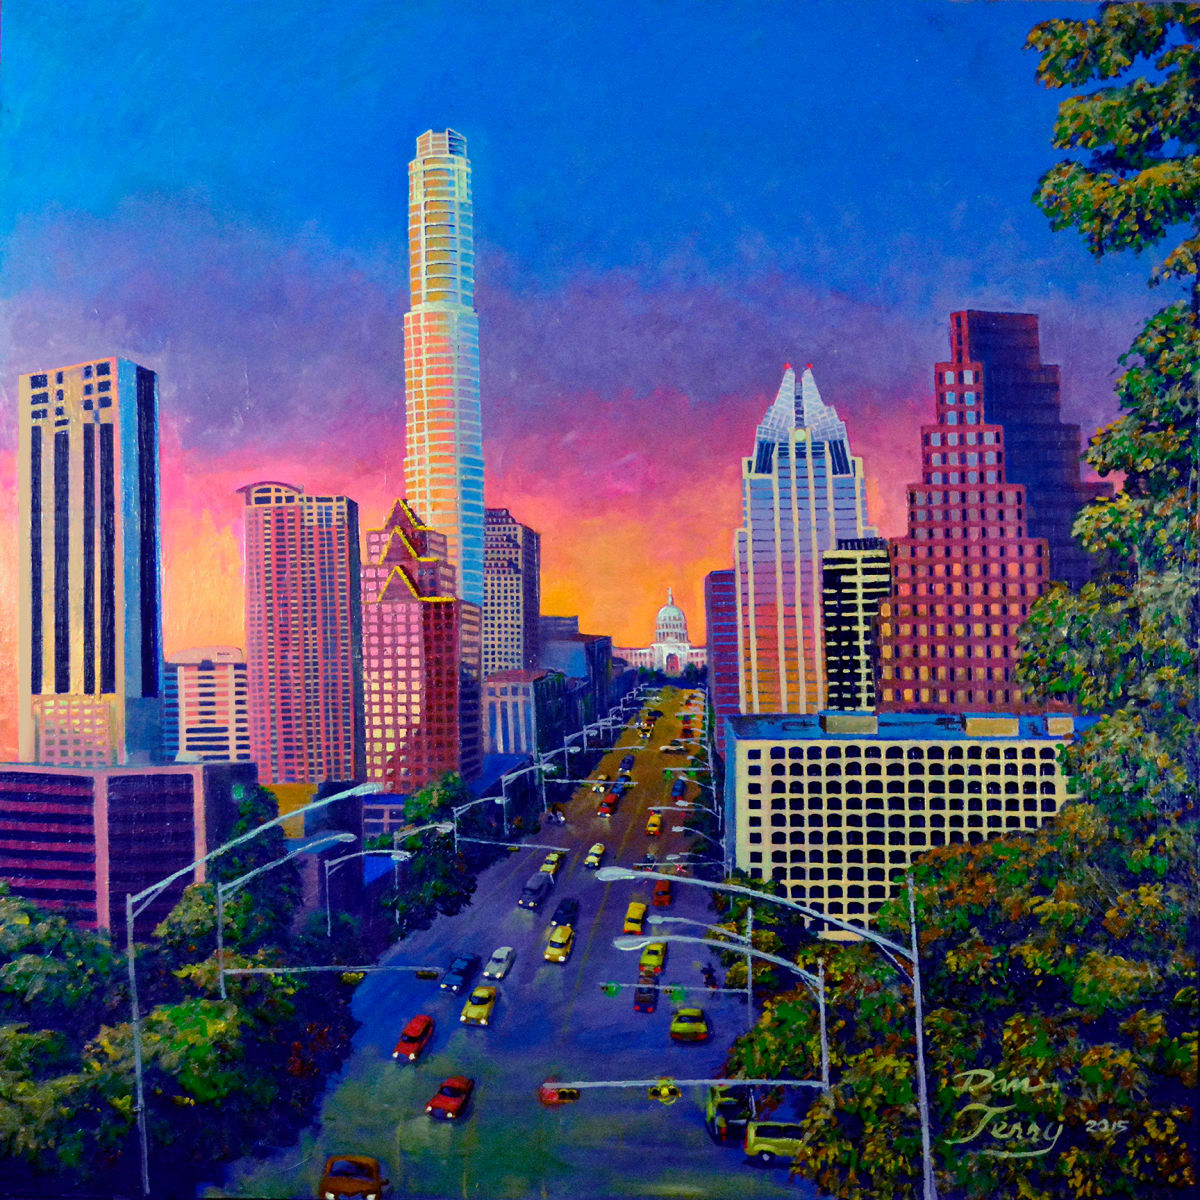 Austin Sunset 26x24 Artist's Proof #1 of 2 Proof 1 by Dan Terry  Image: This limited edition is a fine art print of the original oil on canvas painting done by the artist personally in his studio atellier on his large format 7 color, Canon Pro2000 fine art giclee printer on quality canvas to museum standards. Austin Sunset depicts a moment in time of the ever changing Austin city skyline done over a year's time in 2015. Its mood evokes a sense of loss and nostalgia for the city known for it's artistic environment that nurtured creativity and innovation. The sunset represents the end of the day for one Austin, snapshots of memories of Austin's past as a new emerging metropolis looms inevitably. Each 26x24" print is hand signed and numbered and comes with a signed, stamped and sealed Certificate of Authenticity verifying it's creation by the artist personally in his studio atellier in Austin, TX. • To quickly and easily purchase this work, simply scan the code and when prompted type in the listed price on the label. You will be able to pick up the work upon the exhibit's close on April 15, at which time the artist will also provide the signed and stamped official Certificate of Authenticity for the work for your records and insurance purposes. 